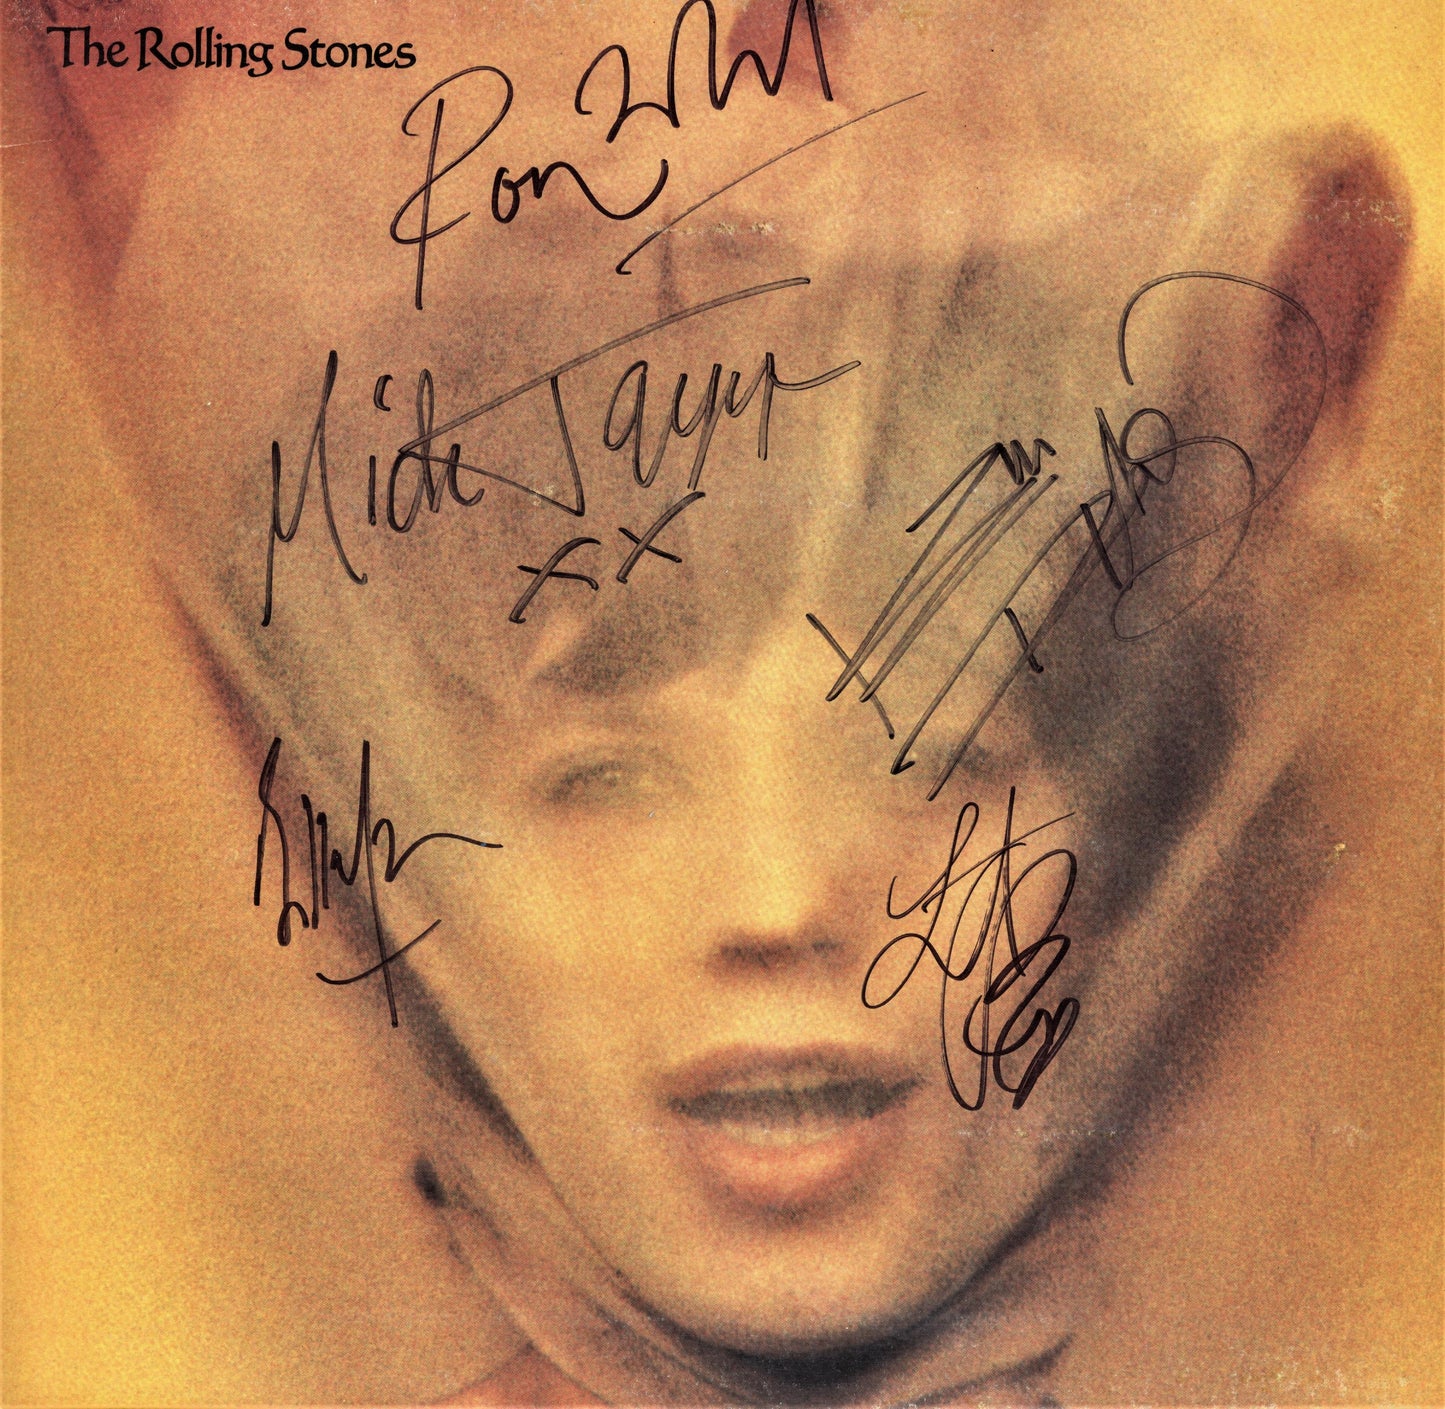 The Rolling Stones Band Signed Goats Head Soup Album - Zion Graphic Collectibles